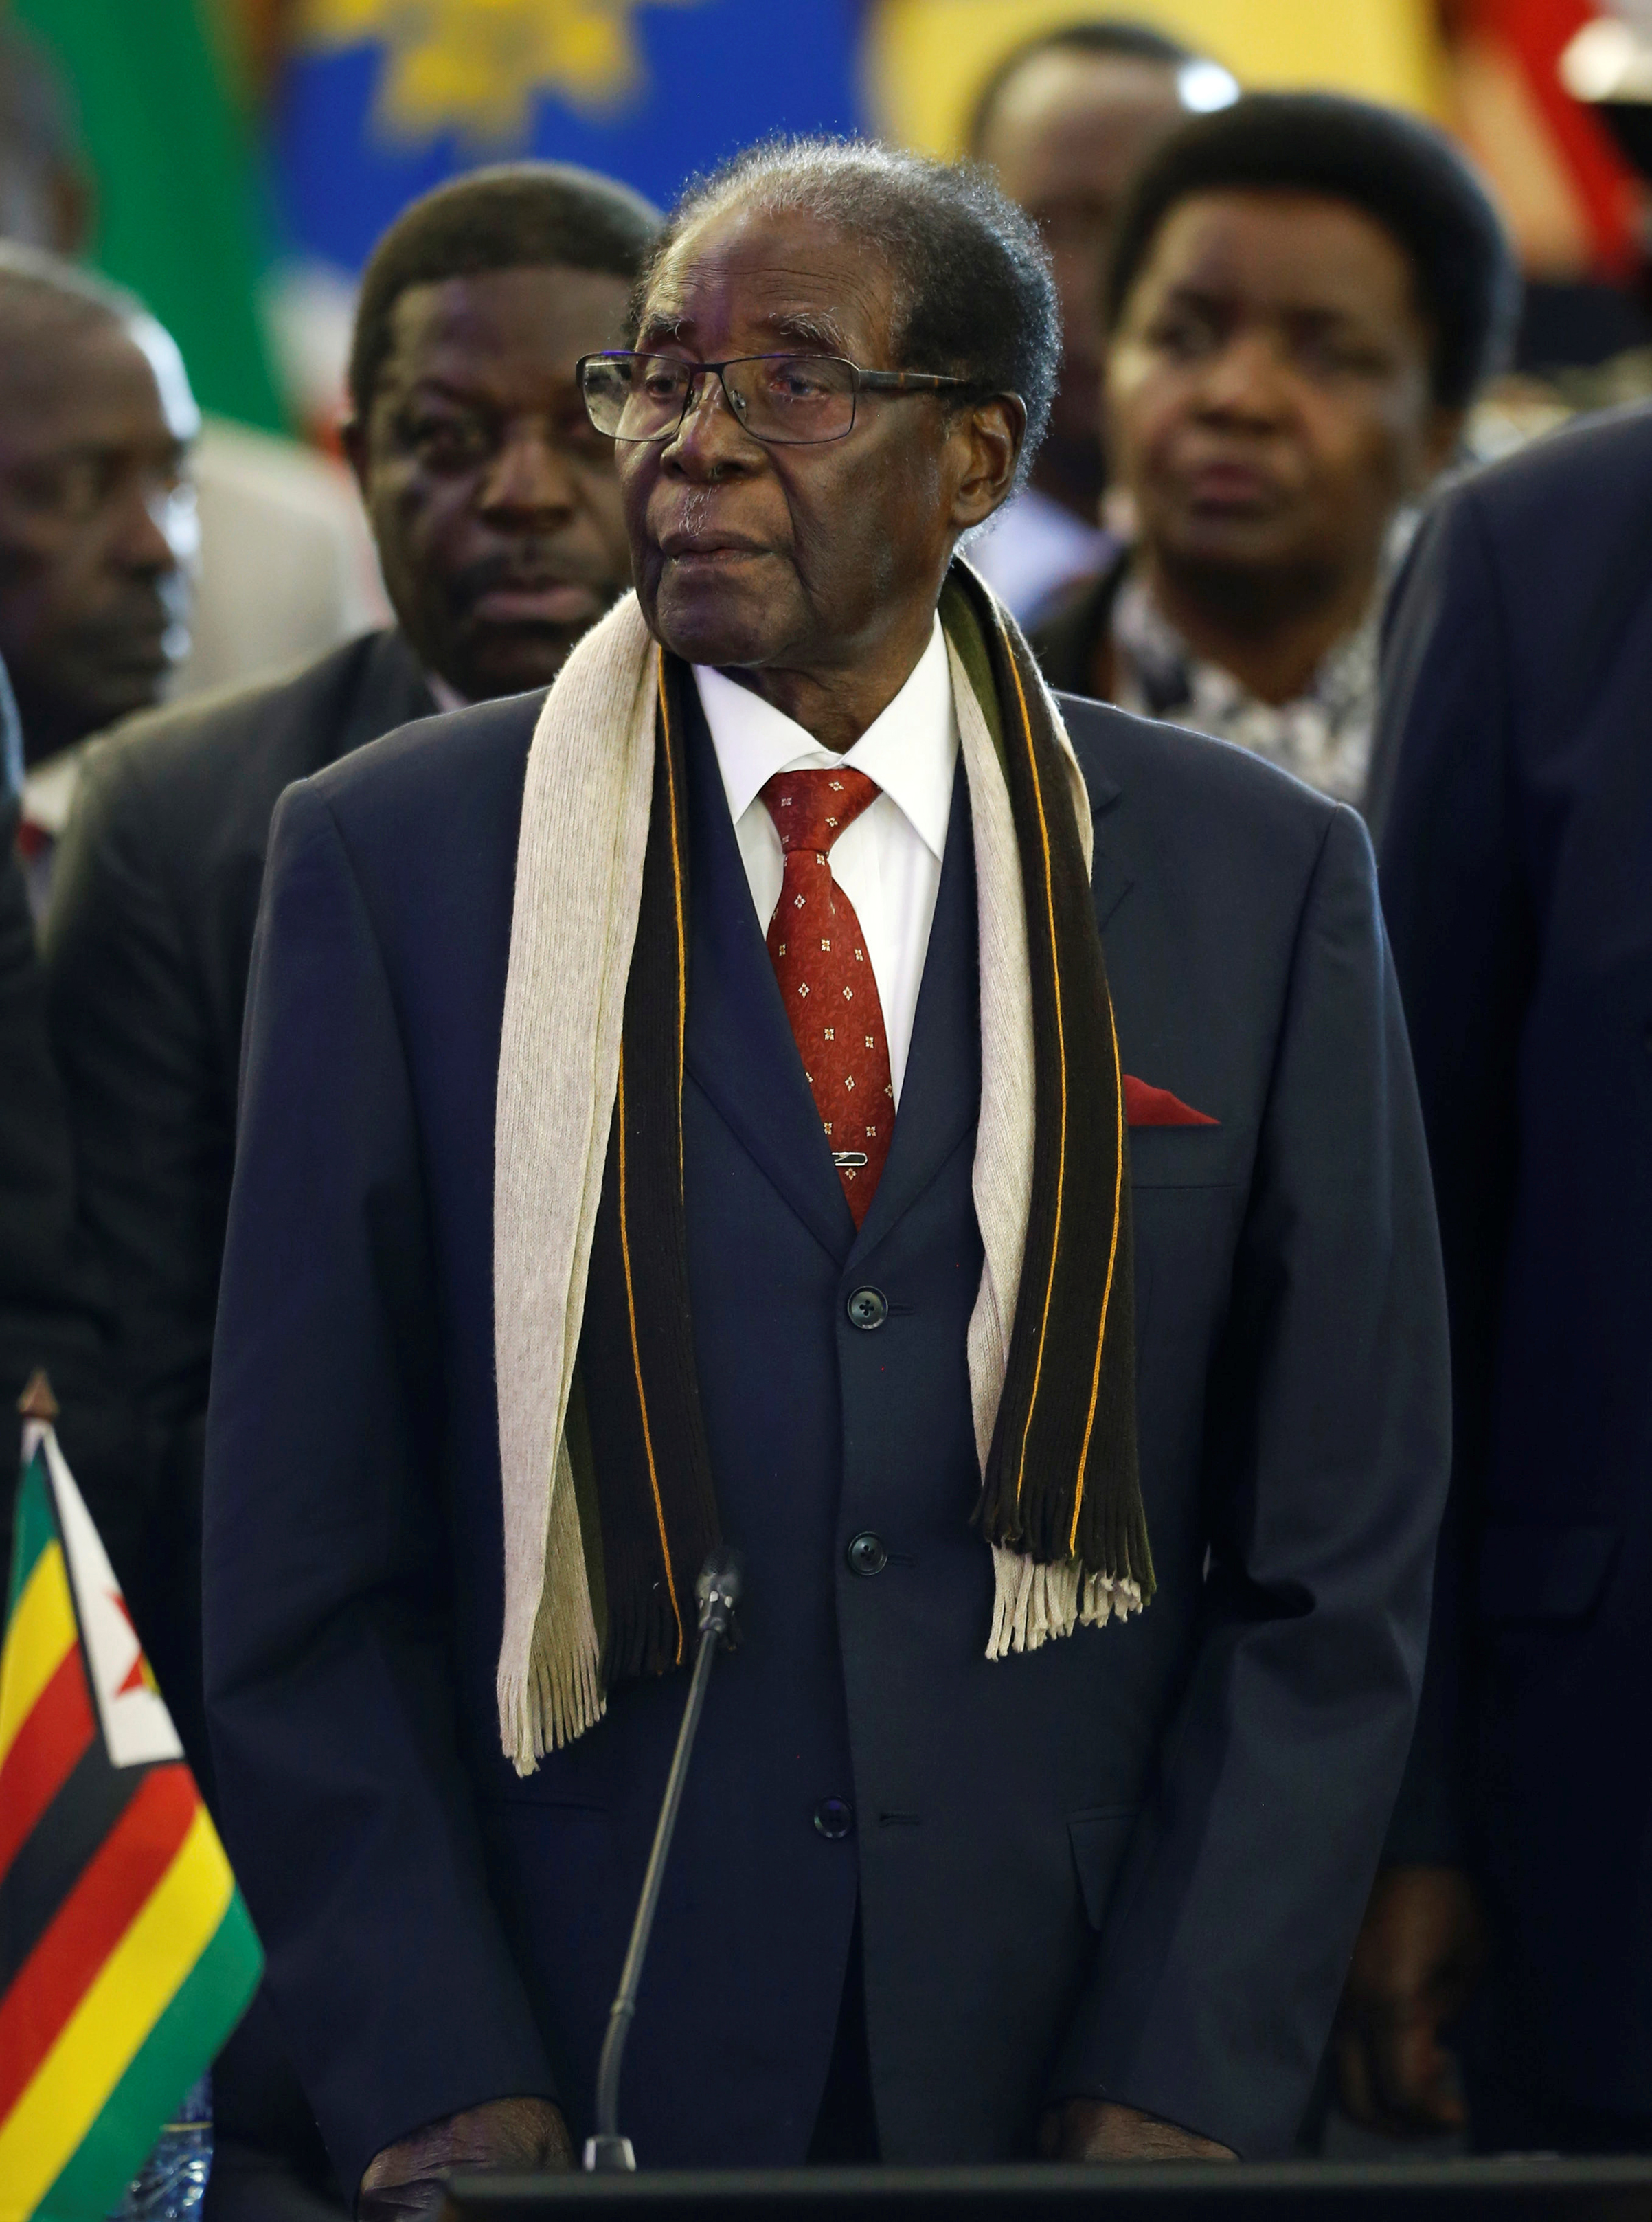 Zimbabwean President Robert Mugabe attends the 37th Ordinary SADC Summit of Heads of State and Government in Pretoria, South Africa, August 19, 2017. (Siphiwe Sibeko—REUTERS)